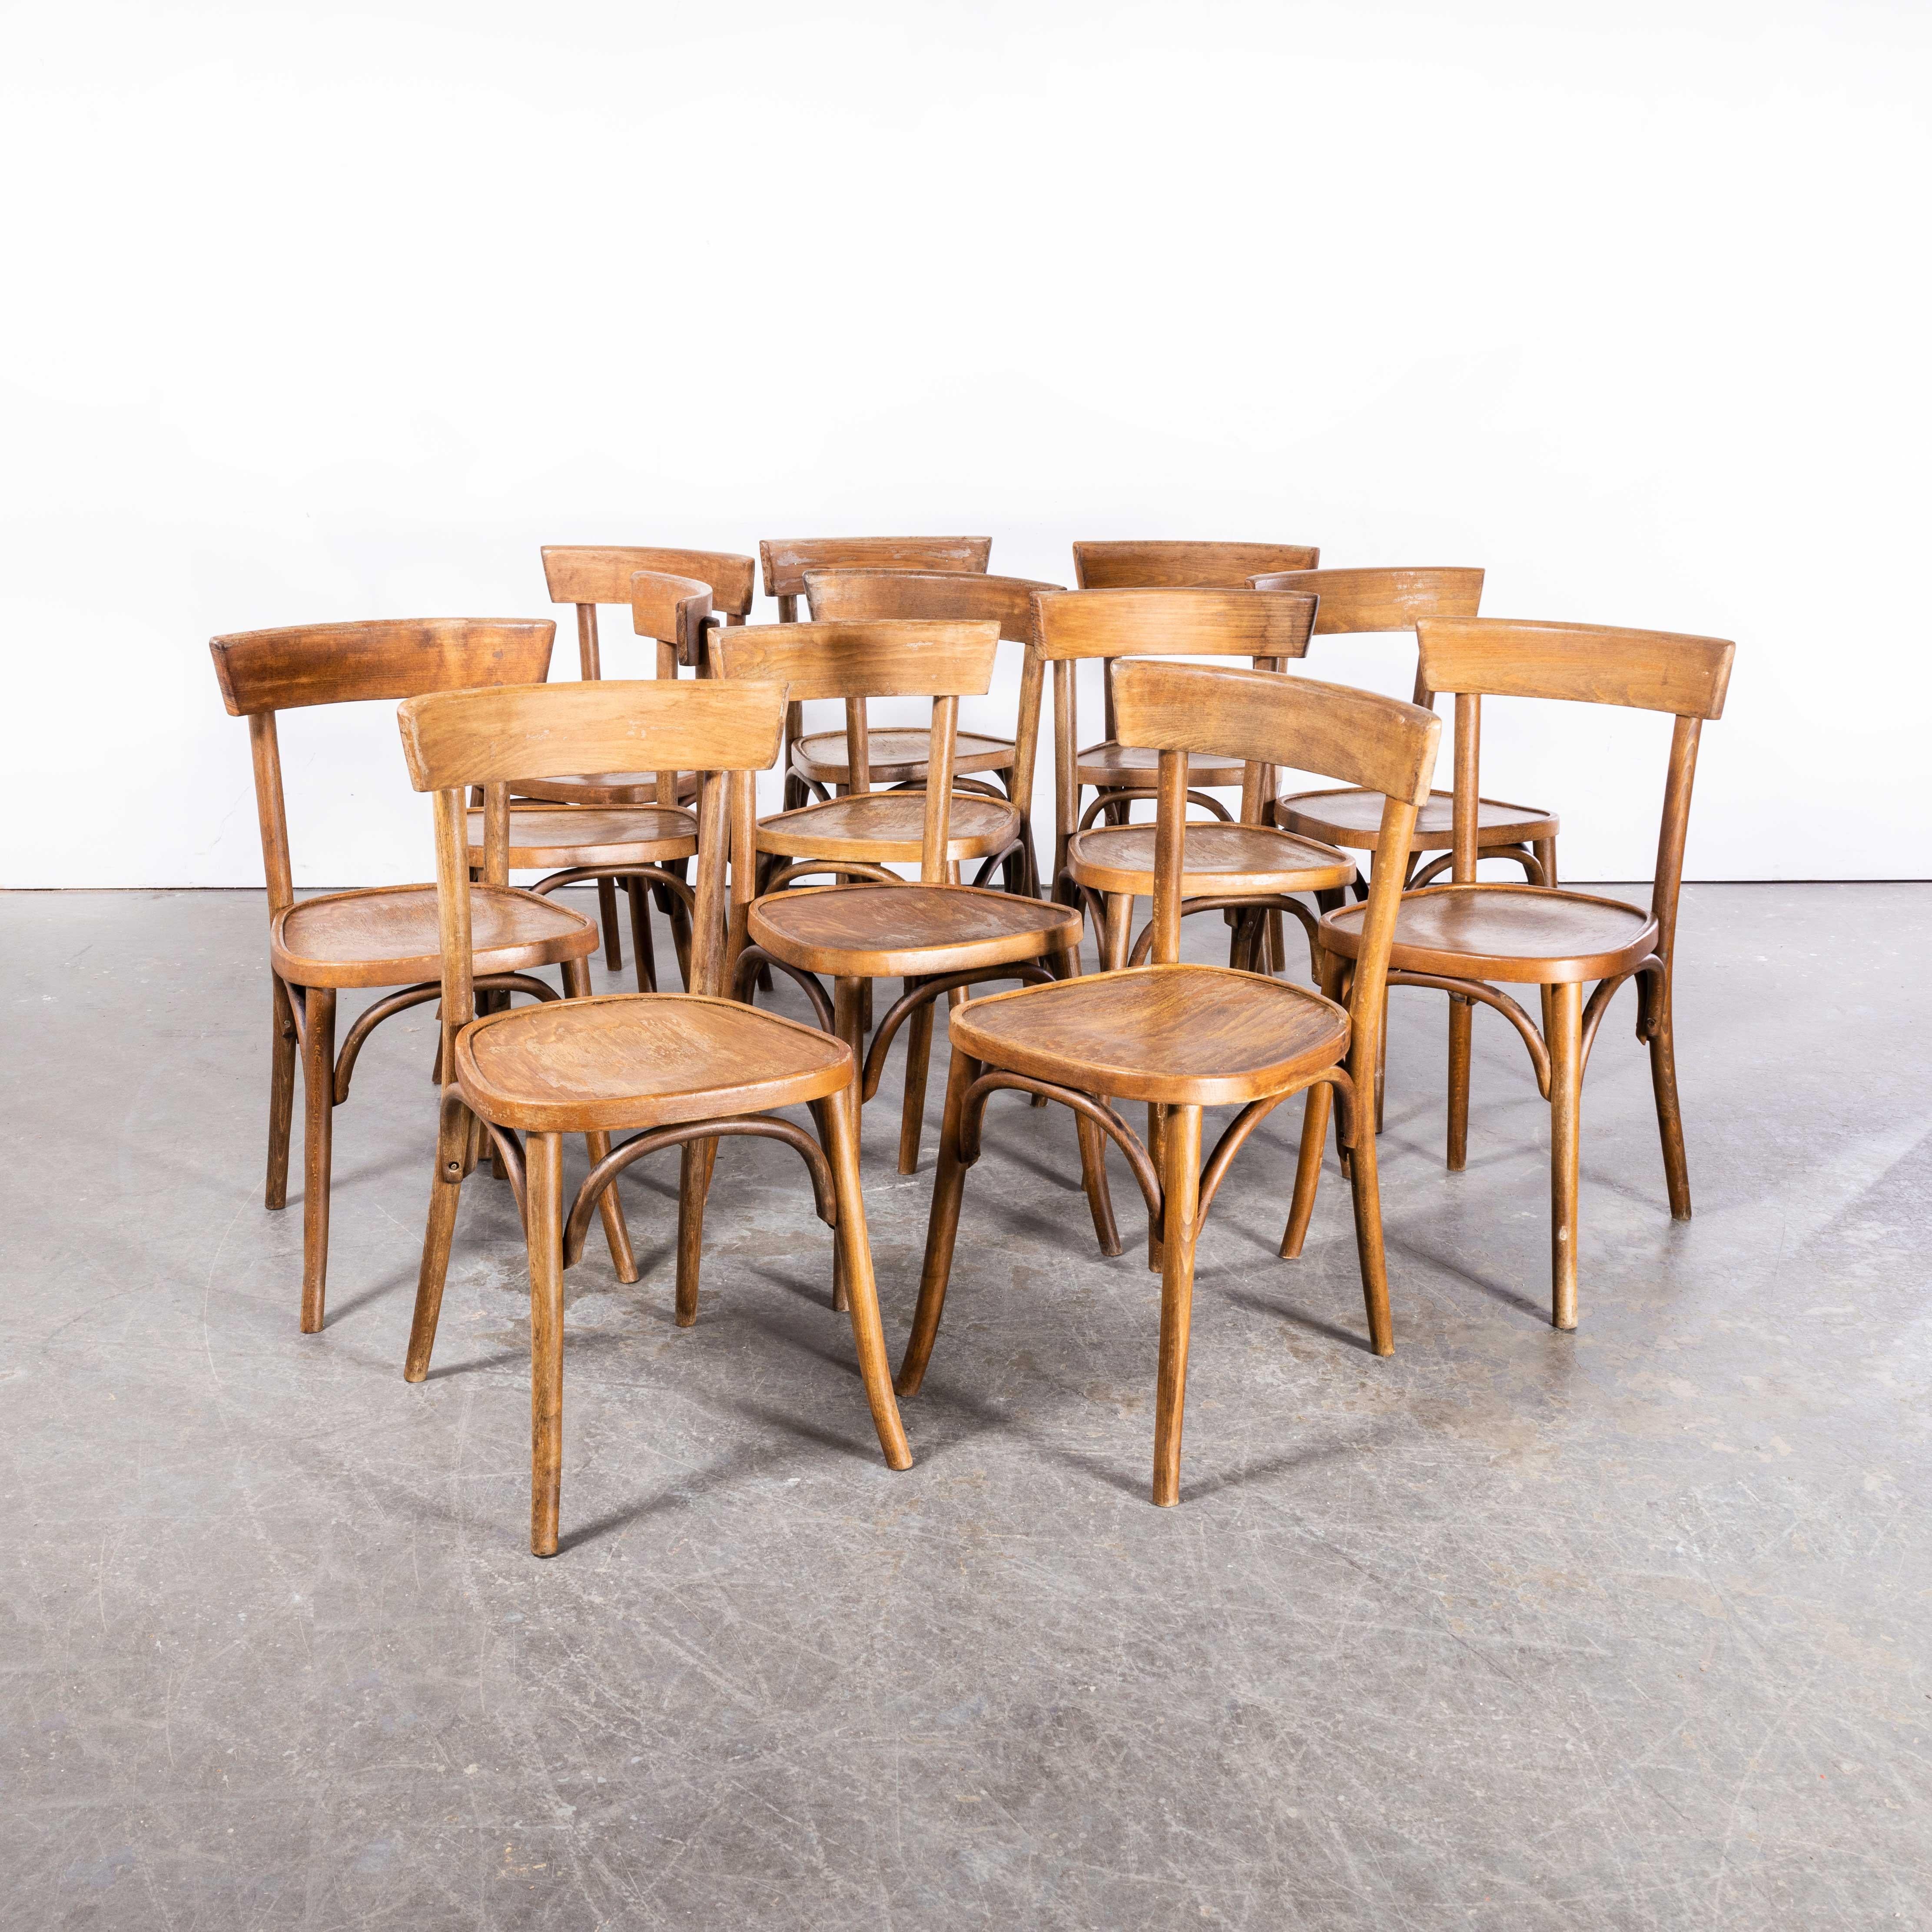 1950’s Luterma Mid Oak Bentwood Dining Chair – Set Of Twelve
1950’s Luterma Mid Oak Bentwood Dining Chair – Set Of Twelve. The process of steam bending beech to create elegant chairs was discovered and developed by Thonet, but when its patents